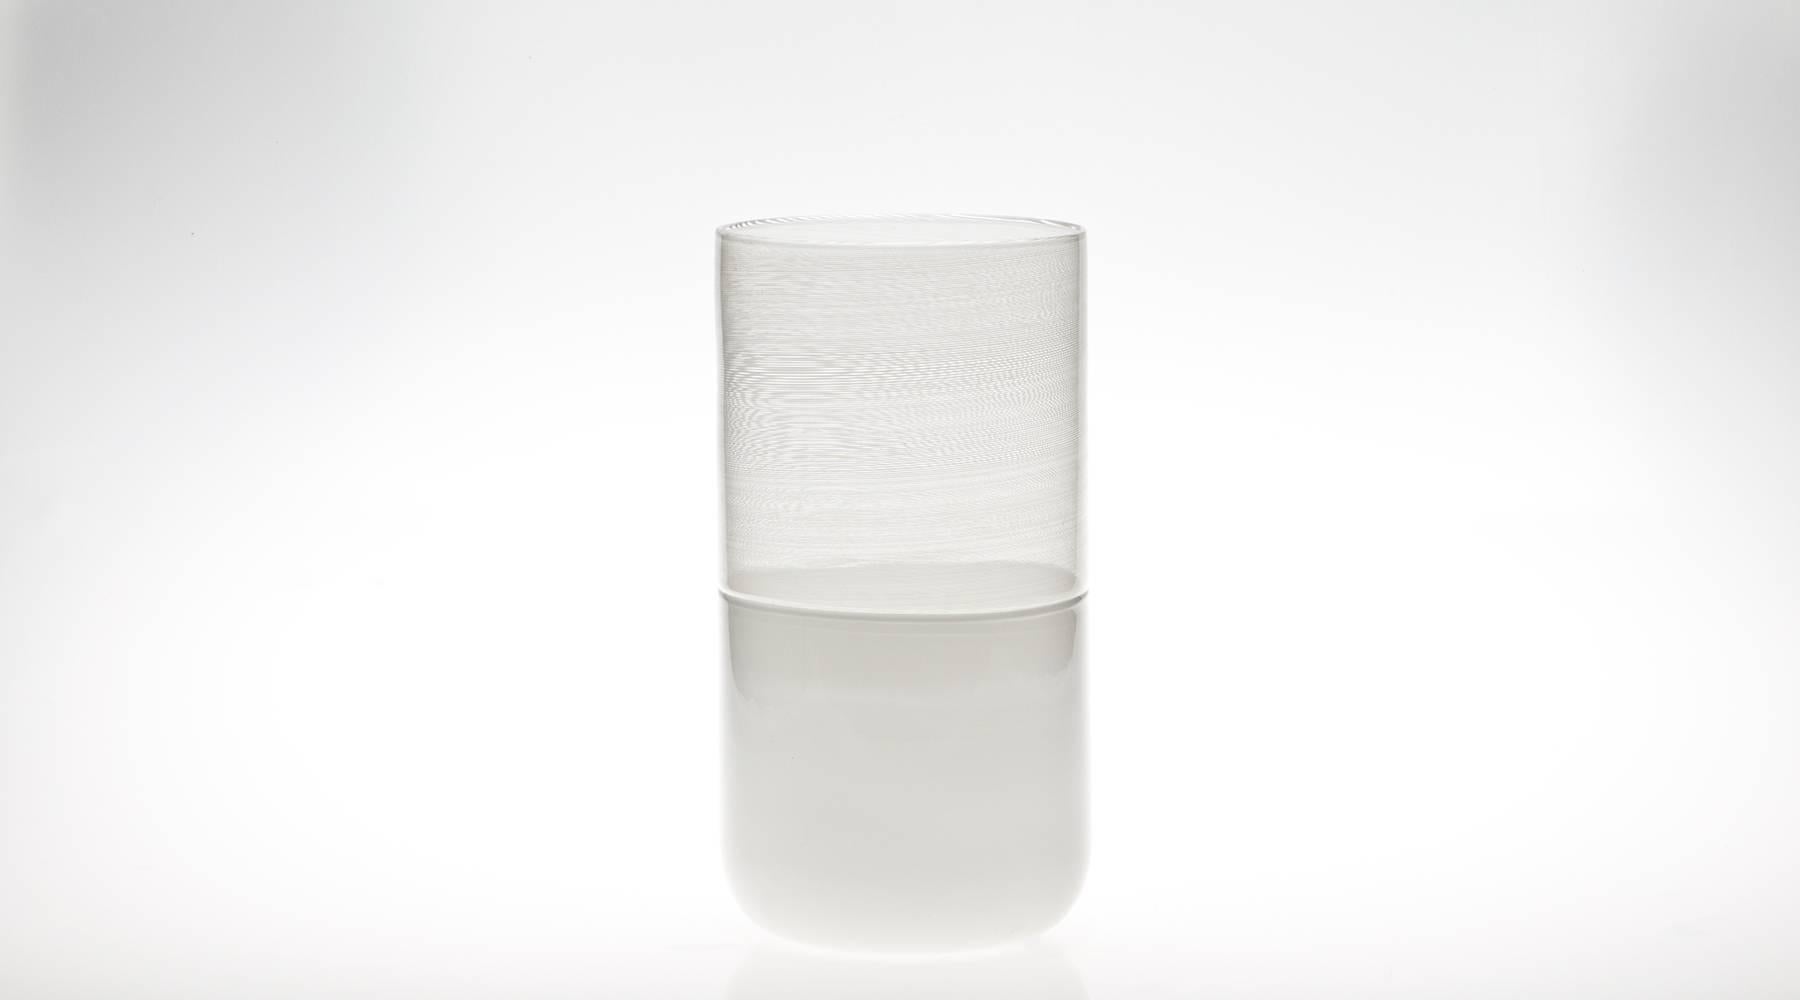 Airy, beautiful handmade vase in white and clear Murano glass by Tapio Wirkkala. It is one of the great pieces of the famous Scandinavian designer. Manufactured by Venini. 

Wirkkala was a Finnish designer and sculptor and a leading figure of